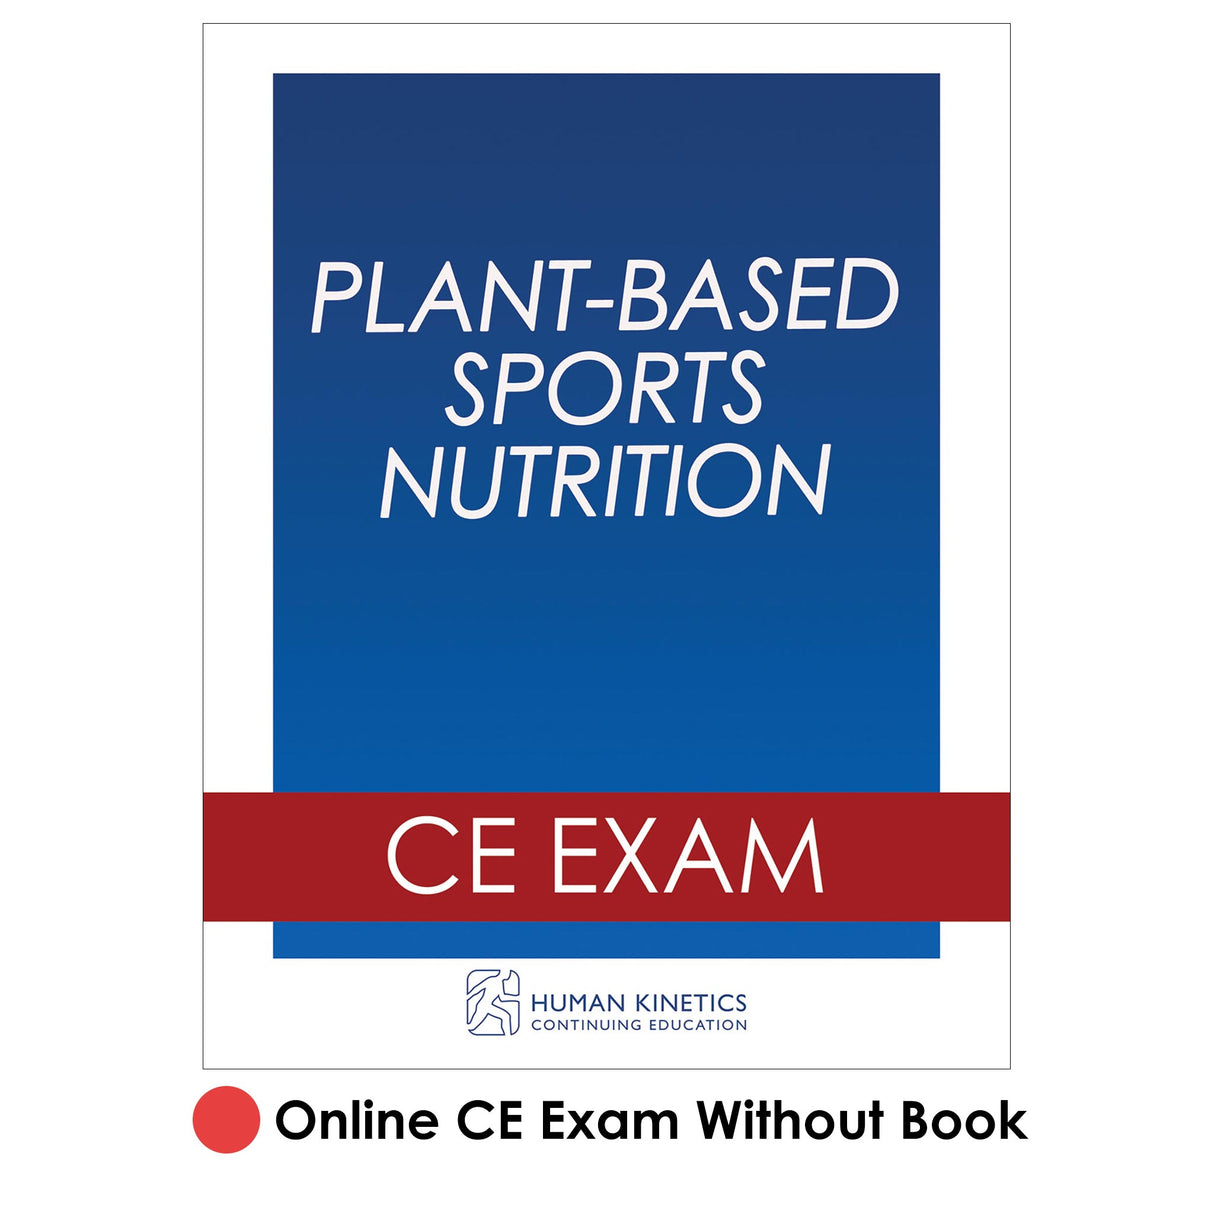 Plant-Based Sports Nutrition Online CE Exam Without Book